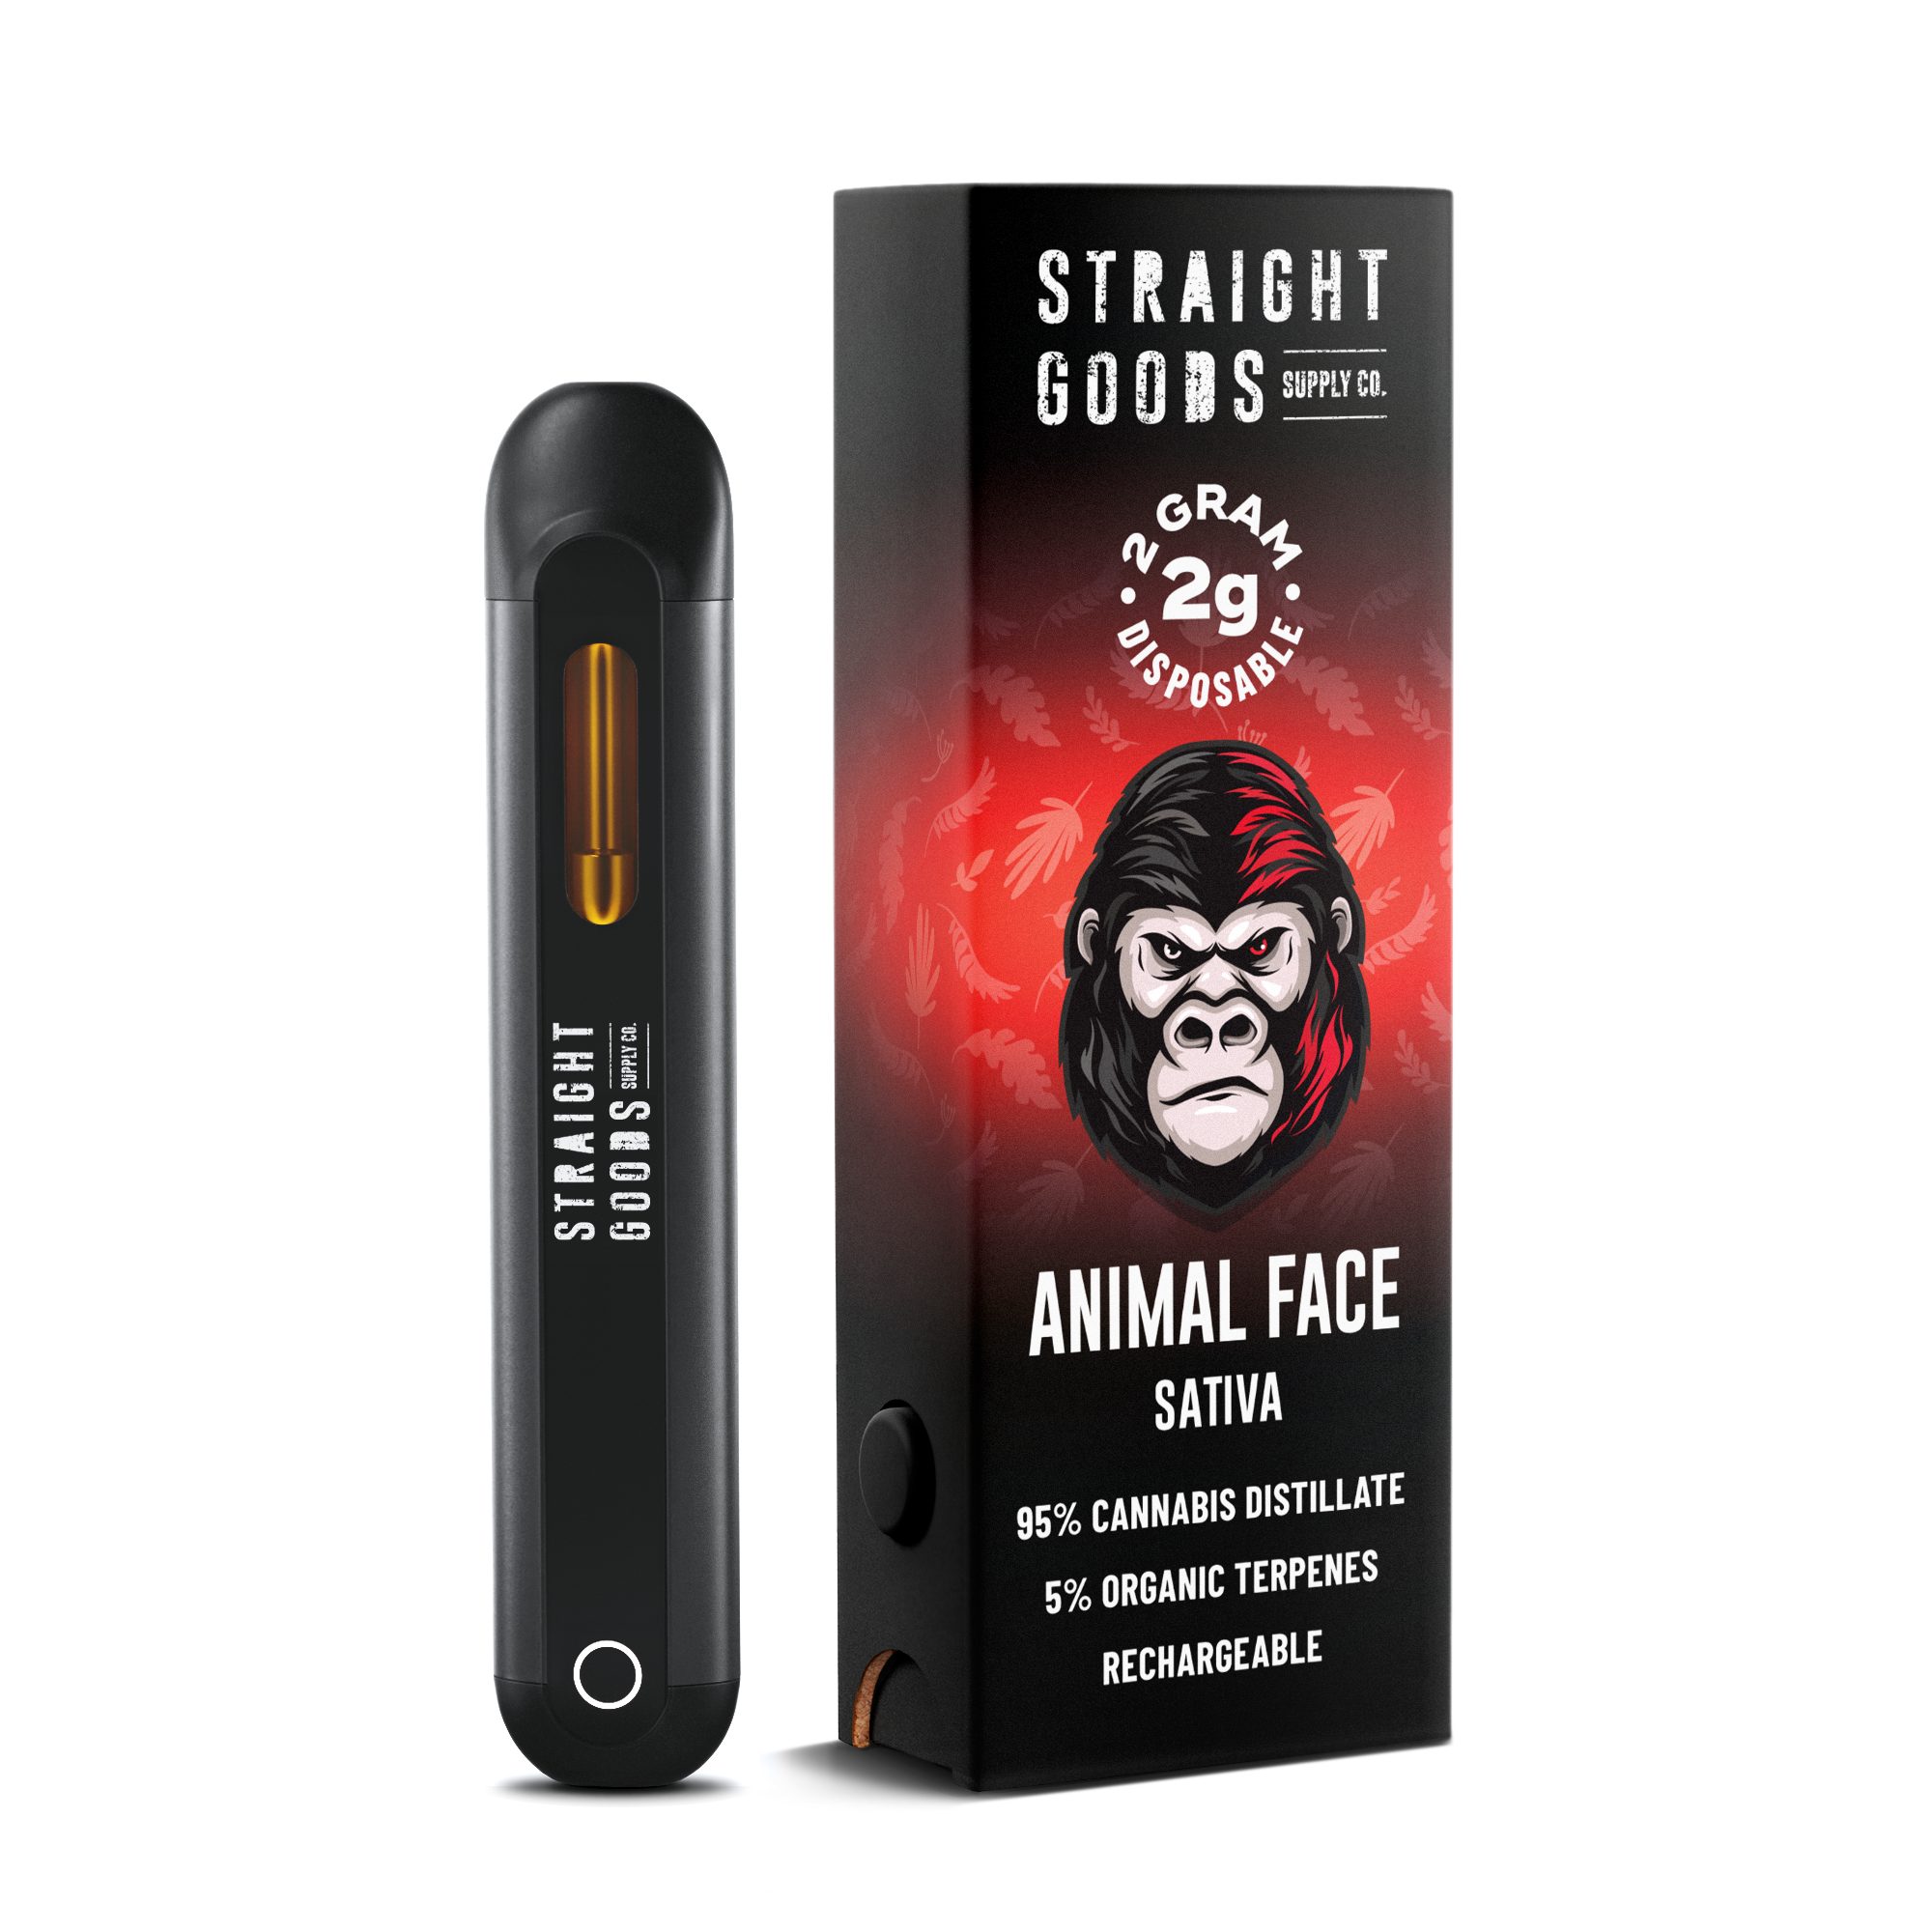 Buy Straight Goods - Animal Face 2G Disposable Pen (Sativa) at Wccannabis Online Shop